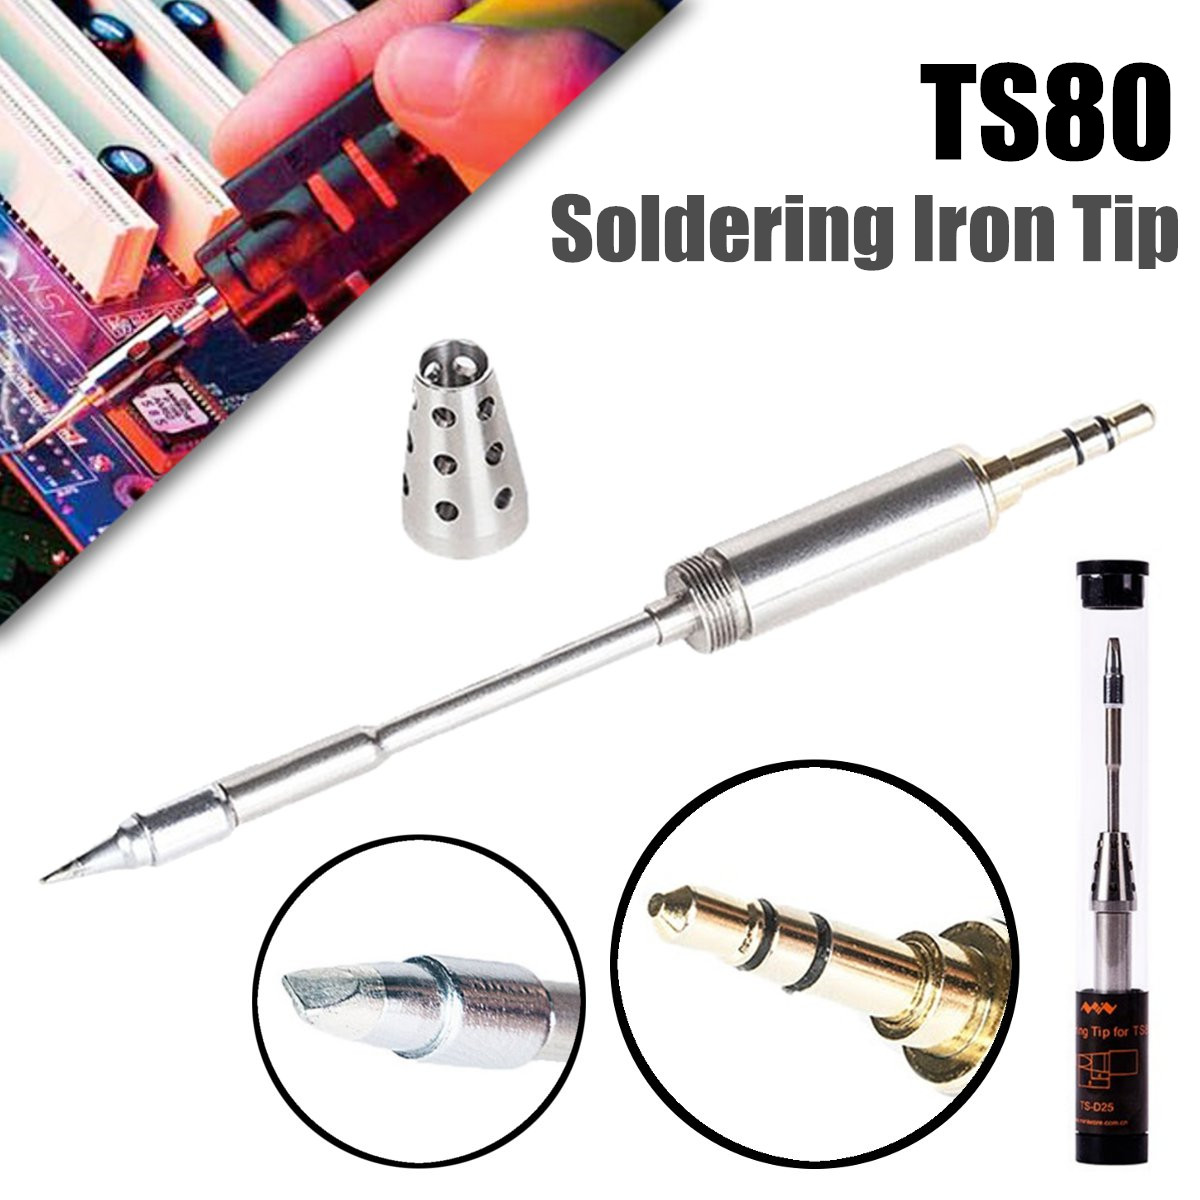 MINI-Original-Replacement-Solder-Tip-Soldering-Iron-Tips-for-TS80-TS80P-Digital-LCD-Soldering-Iron-1373556-1